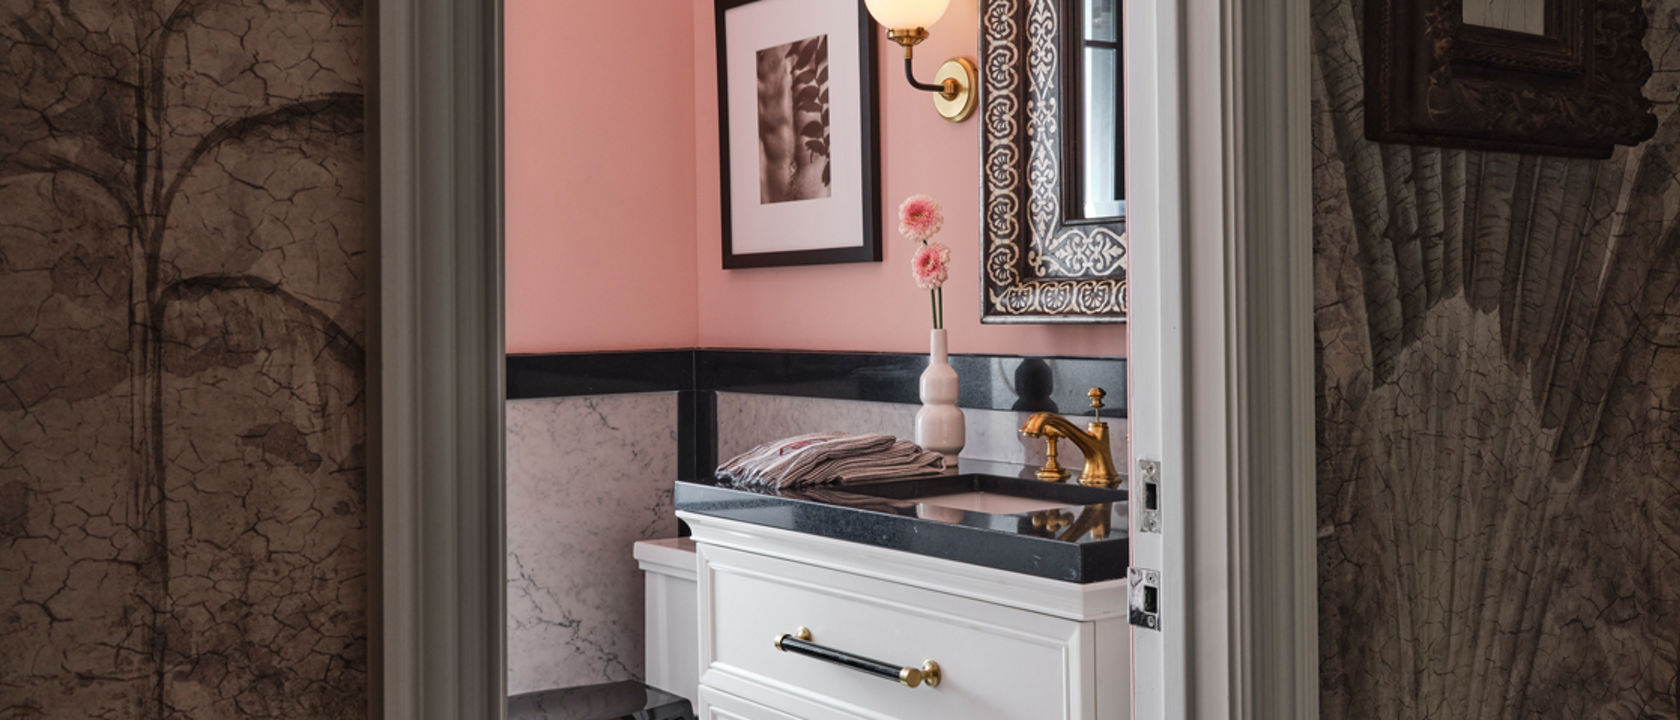 A bathroom with black and white tile flooring, pink painted walls, white cabinets, and black quartz countertops.